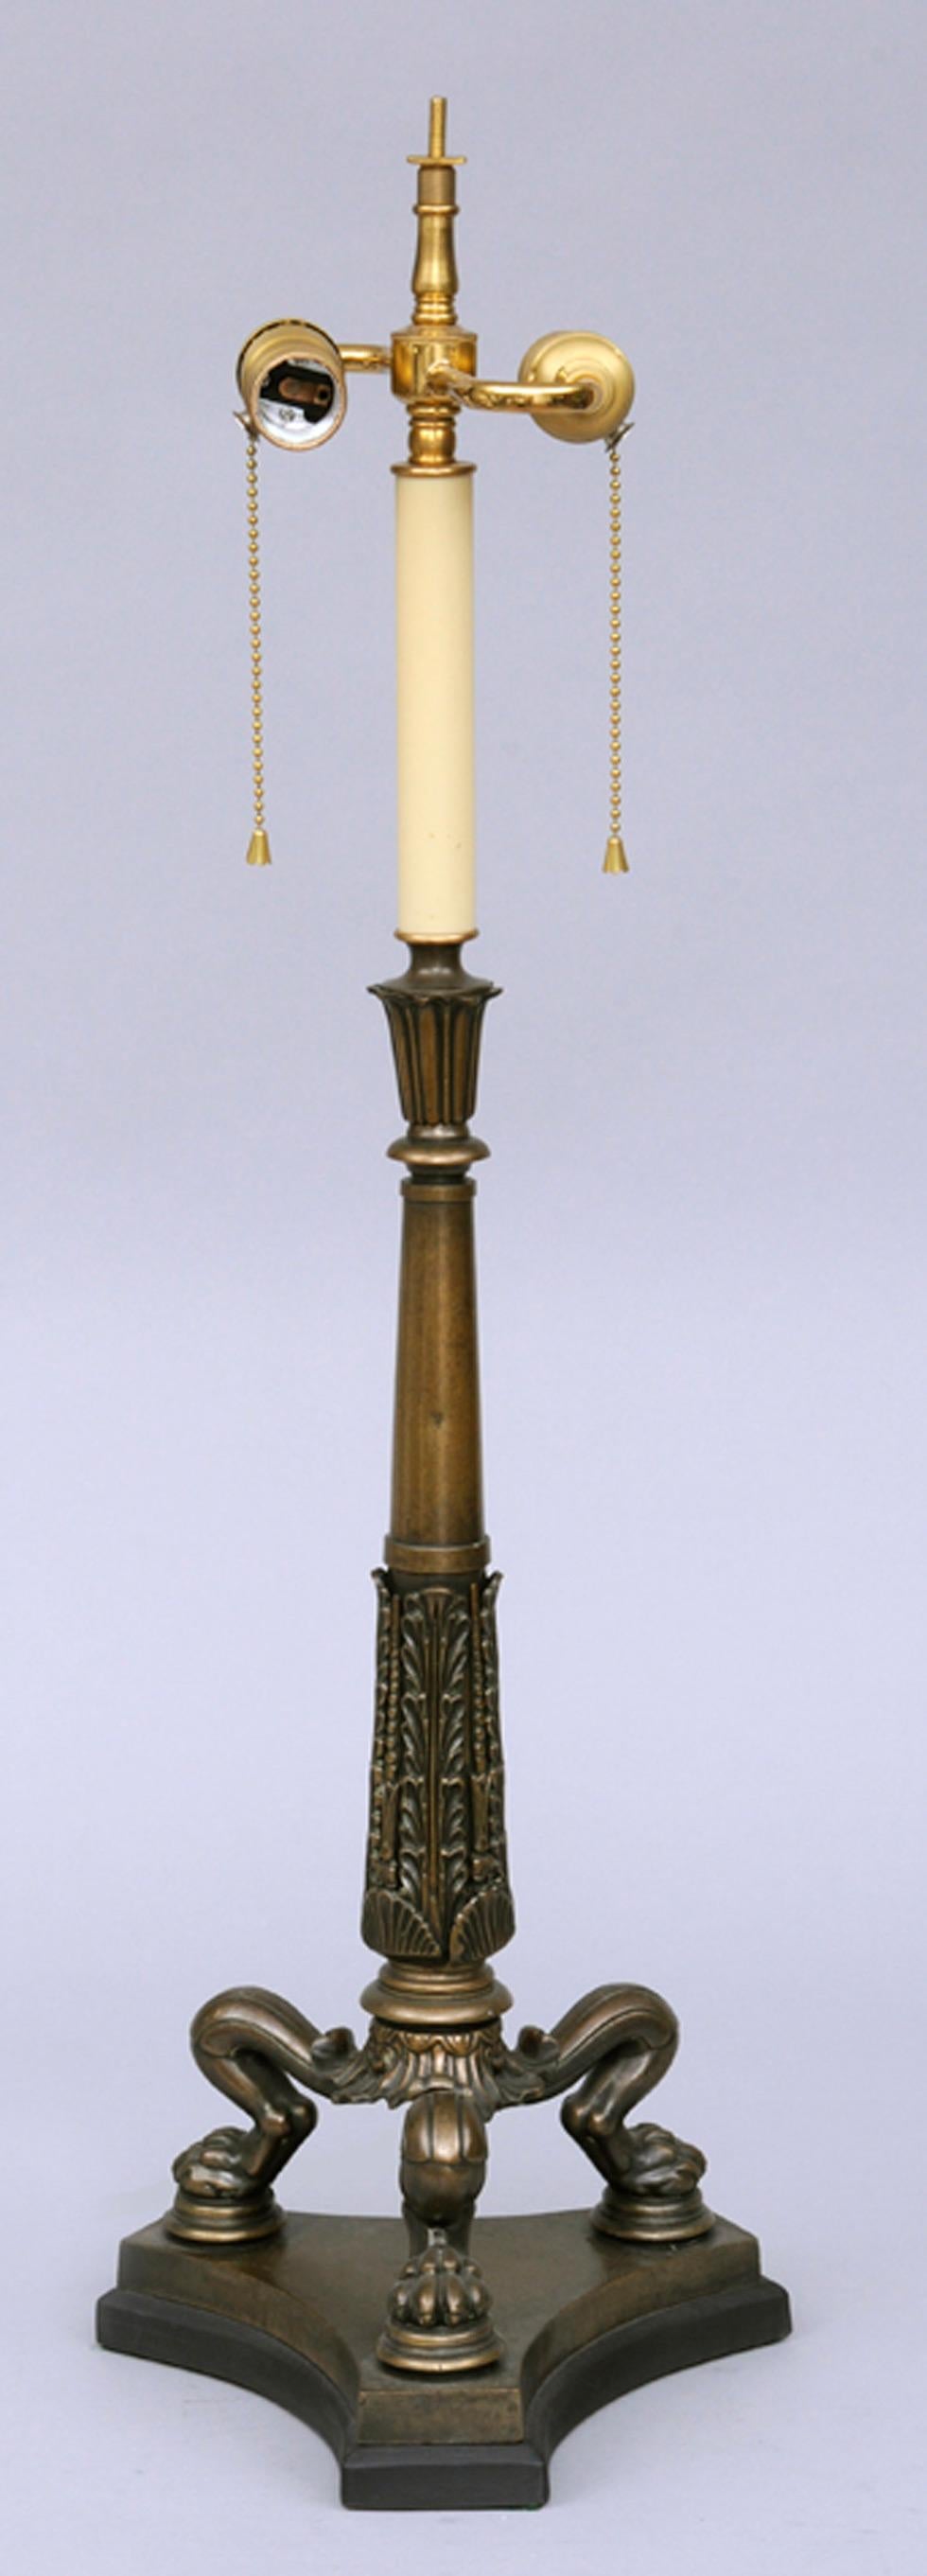 Regency bronze lamp with tall foliate and shell patterned column, tripod paw feet on concave-shaped base with black paper shade.